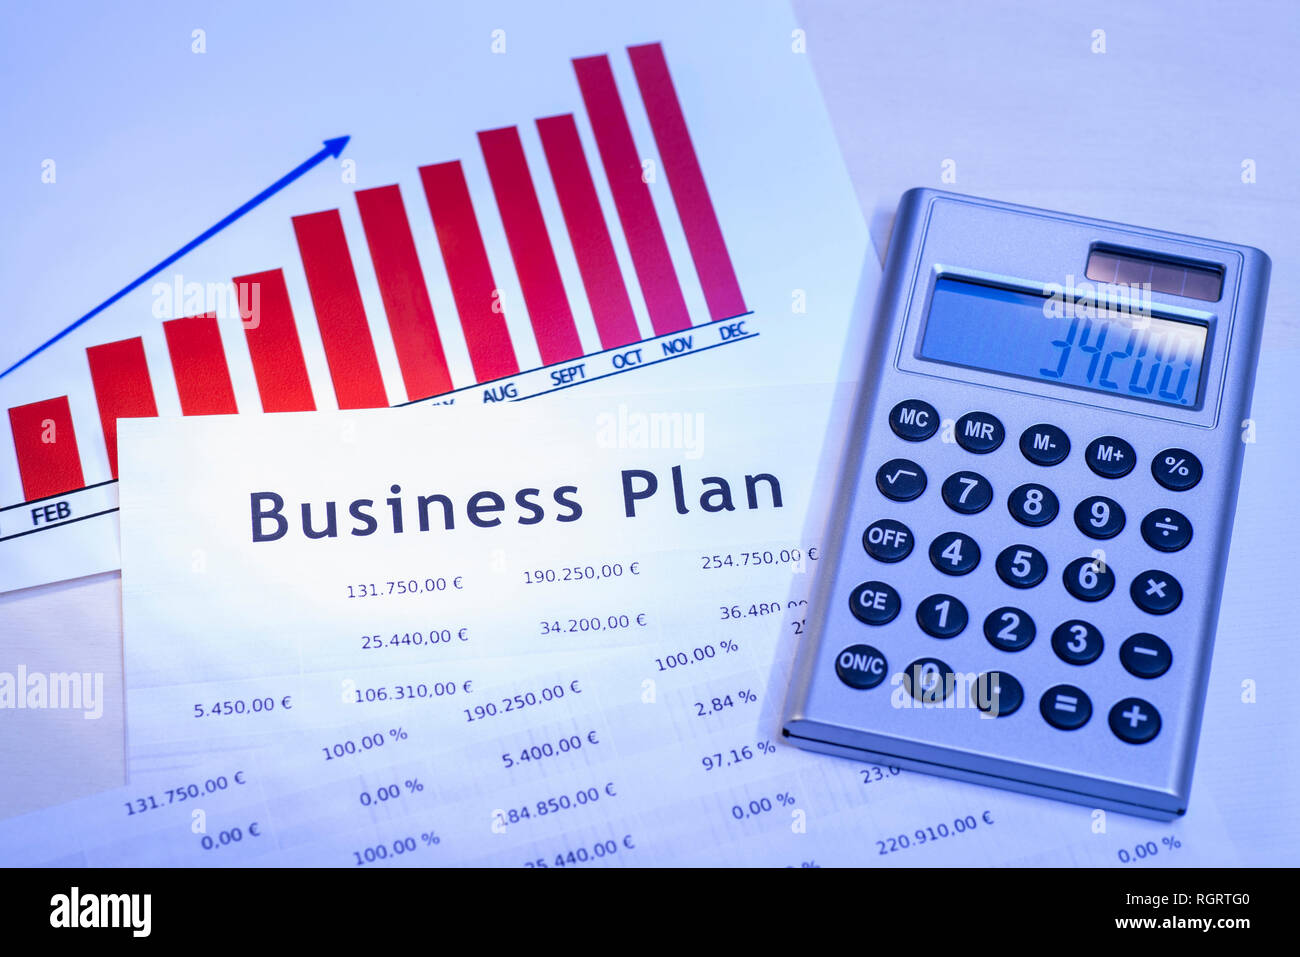 Business plan with tables, graph and a calculator. Stock Photo